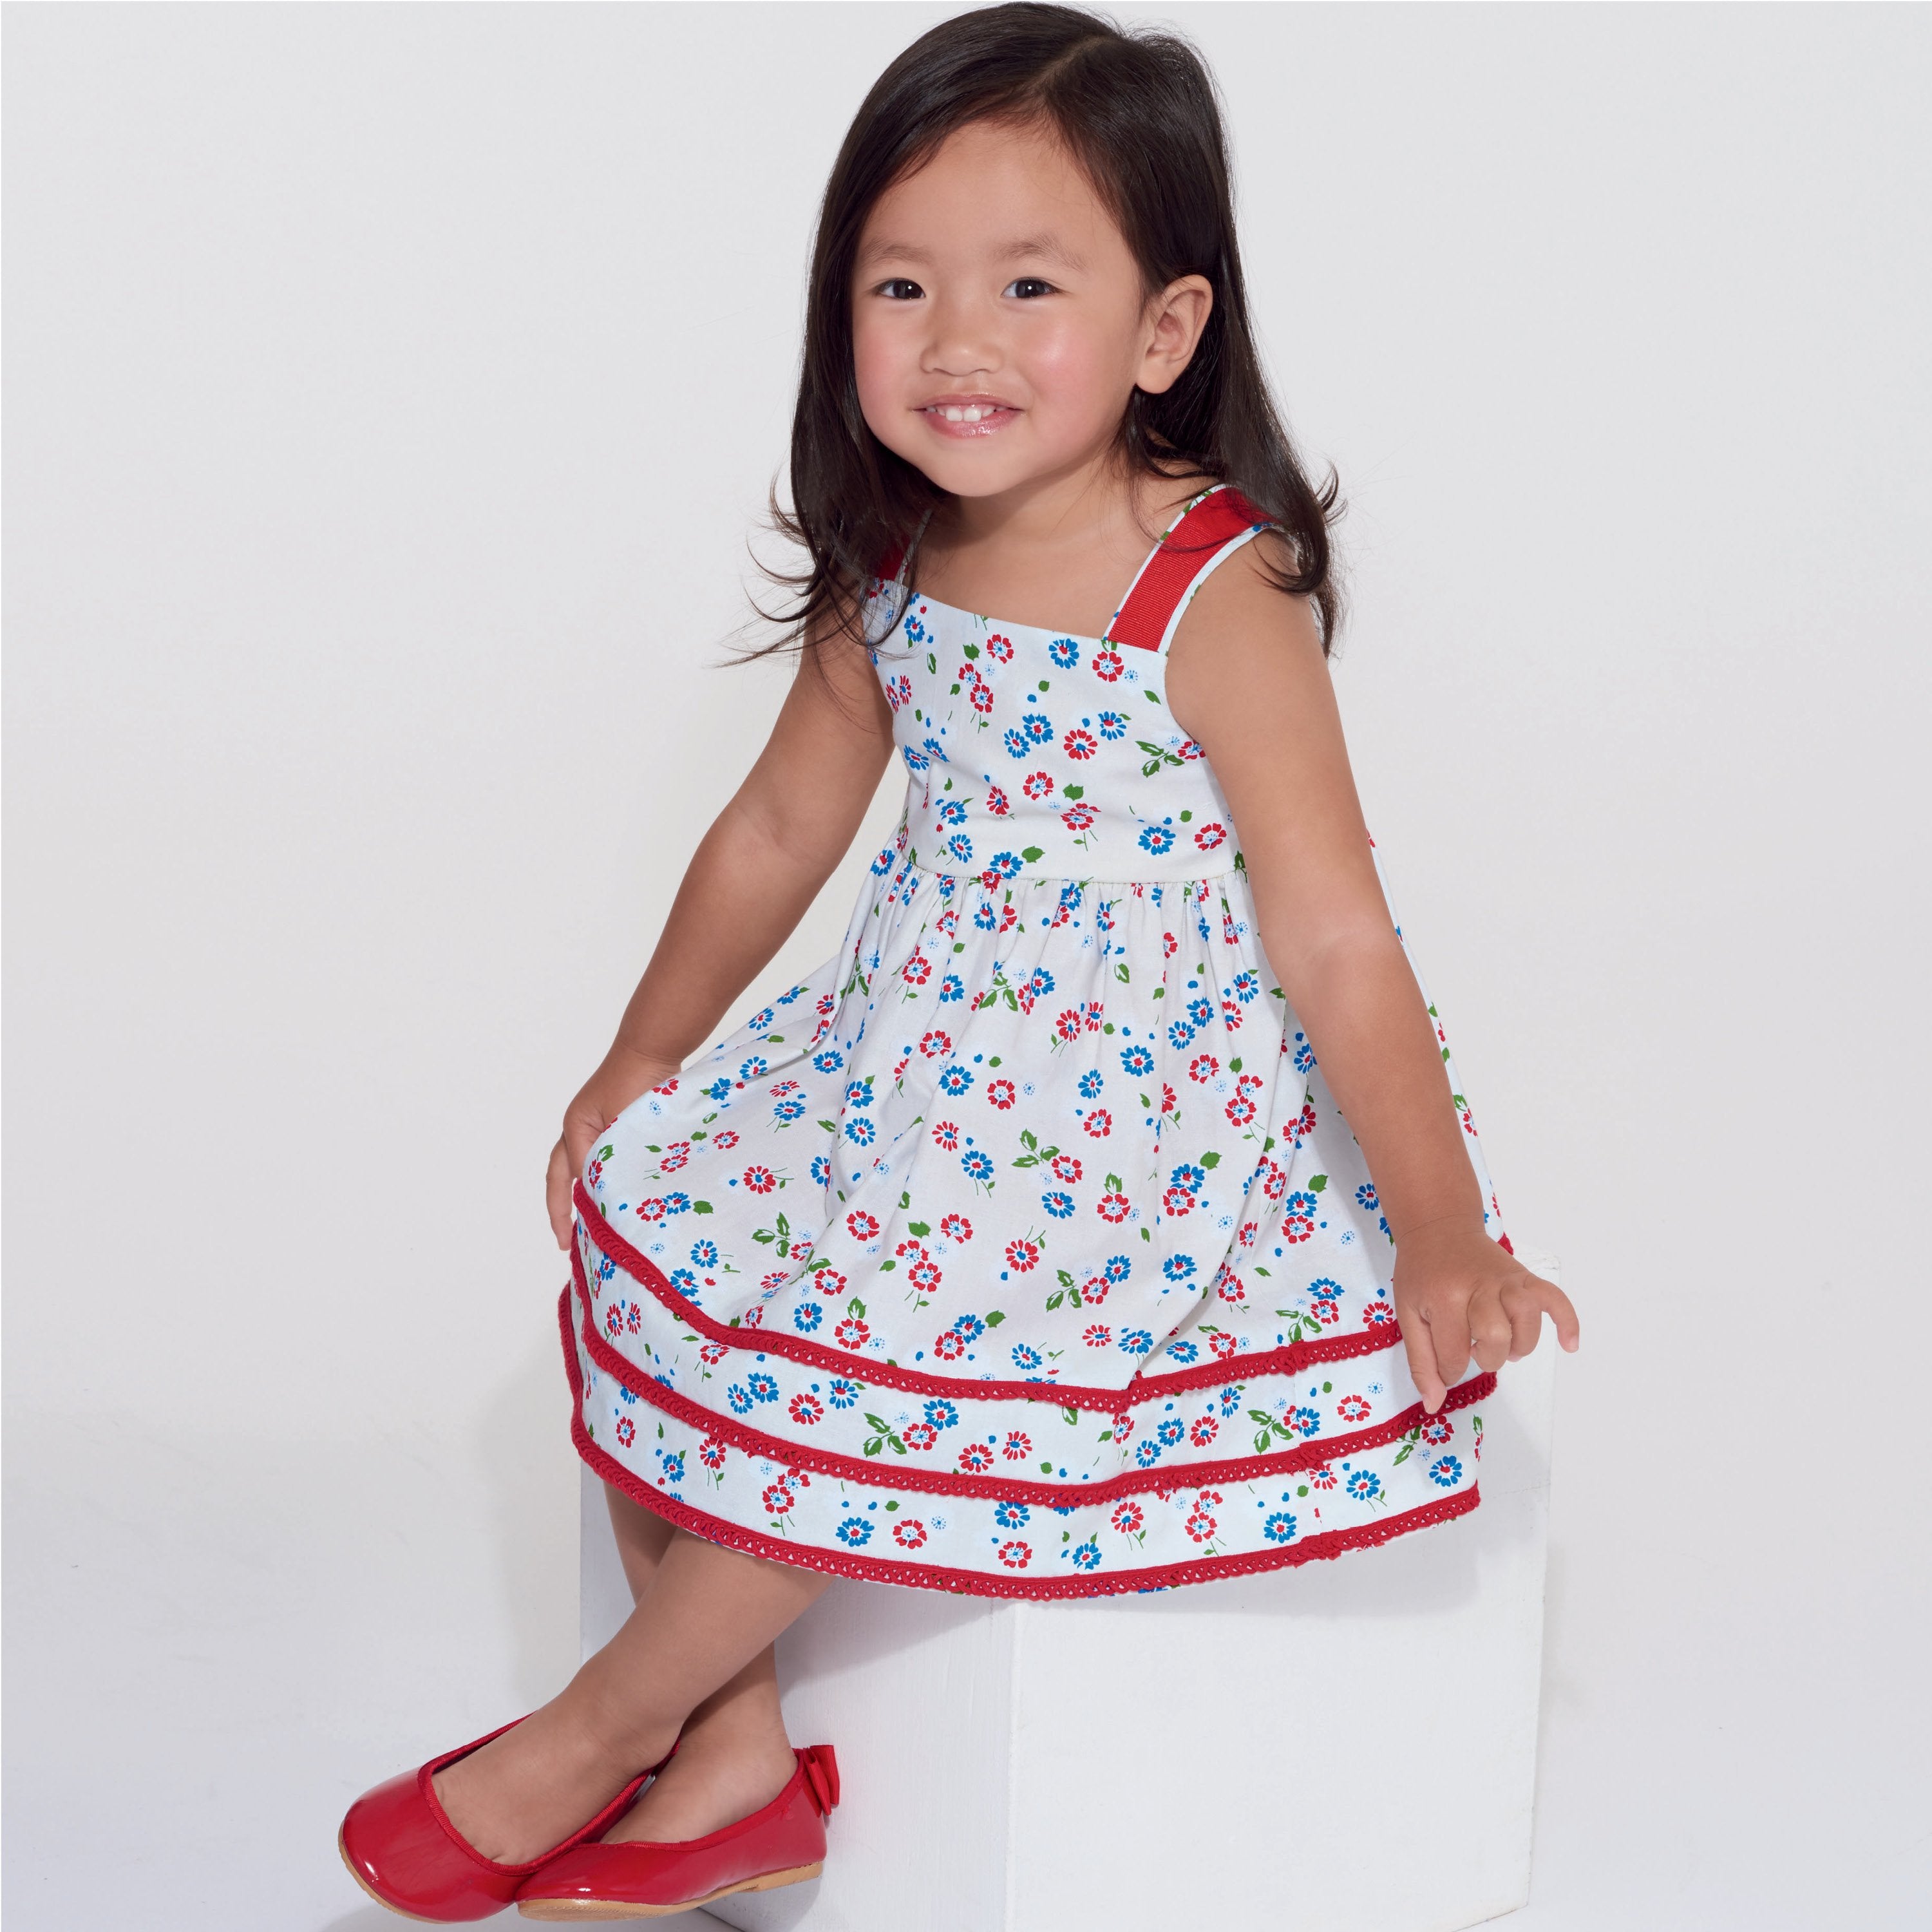 New Look Sewing Pattern 6610 Toddlers' Dress from Jaycotts Sewing Supplies